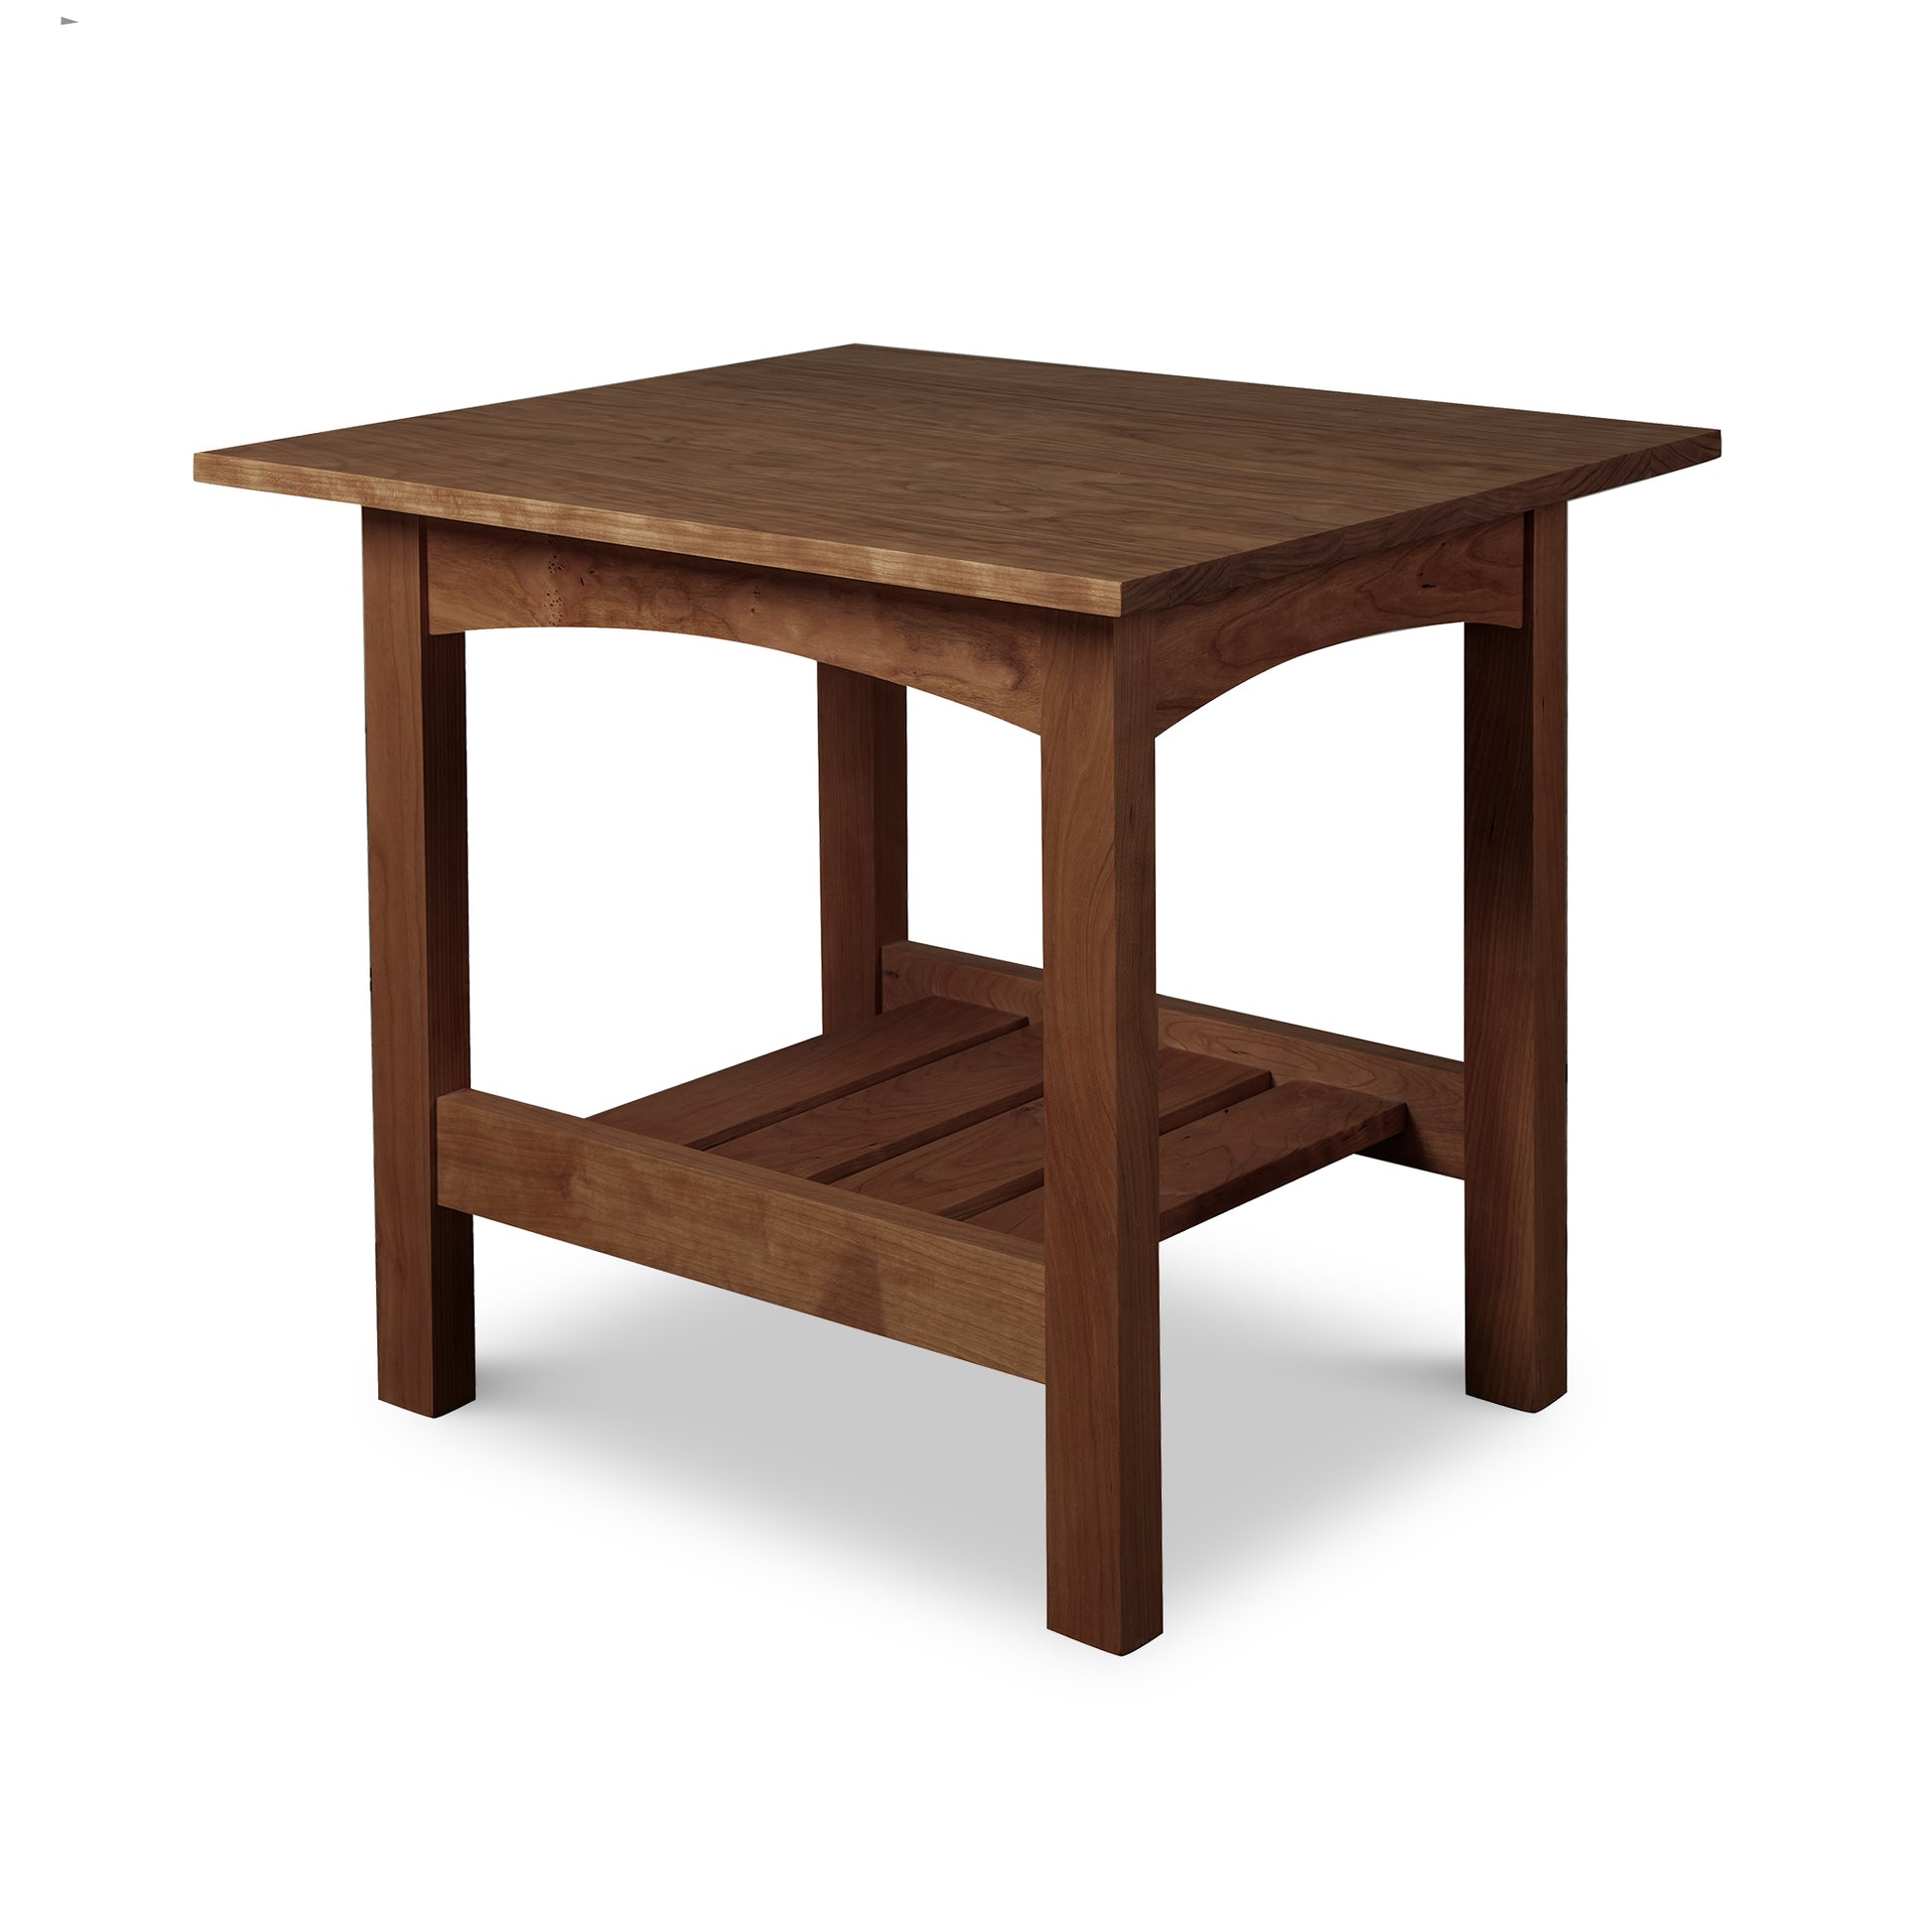 A solid wood Burlington Shaker Lamp Table with a square top and a lower shelf from the Vermont Furniture Designs Collection, isolated on a white background.